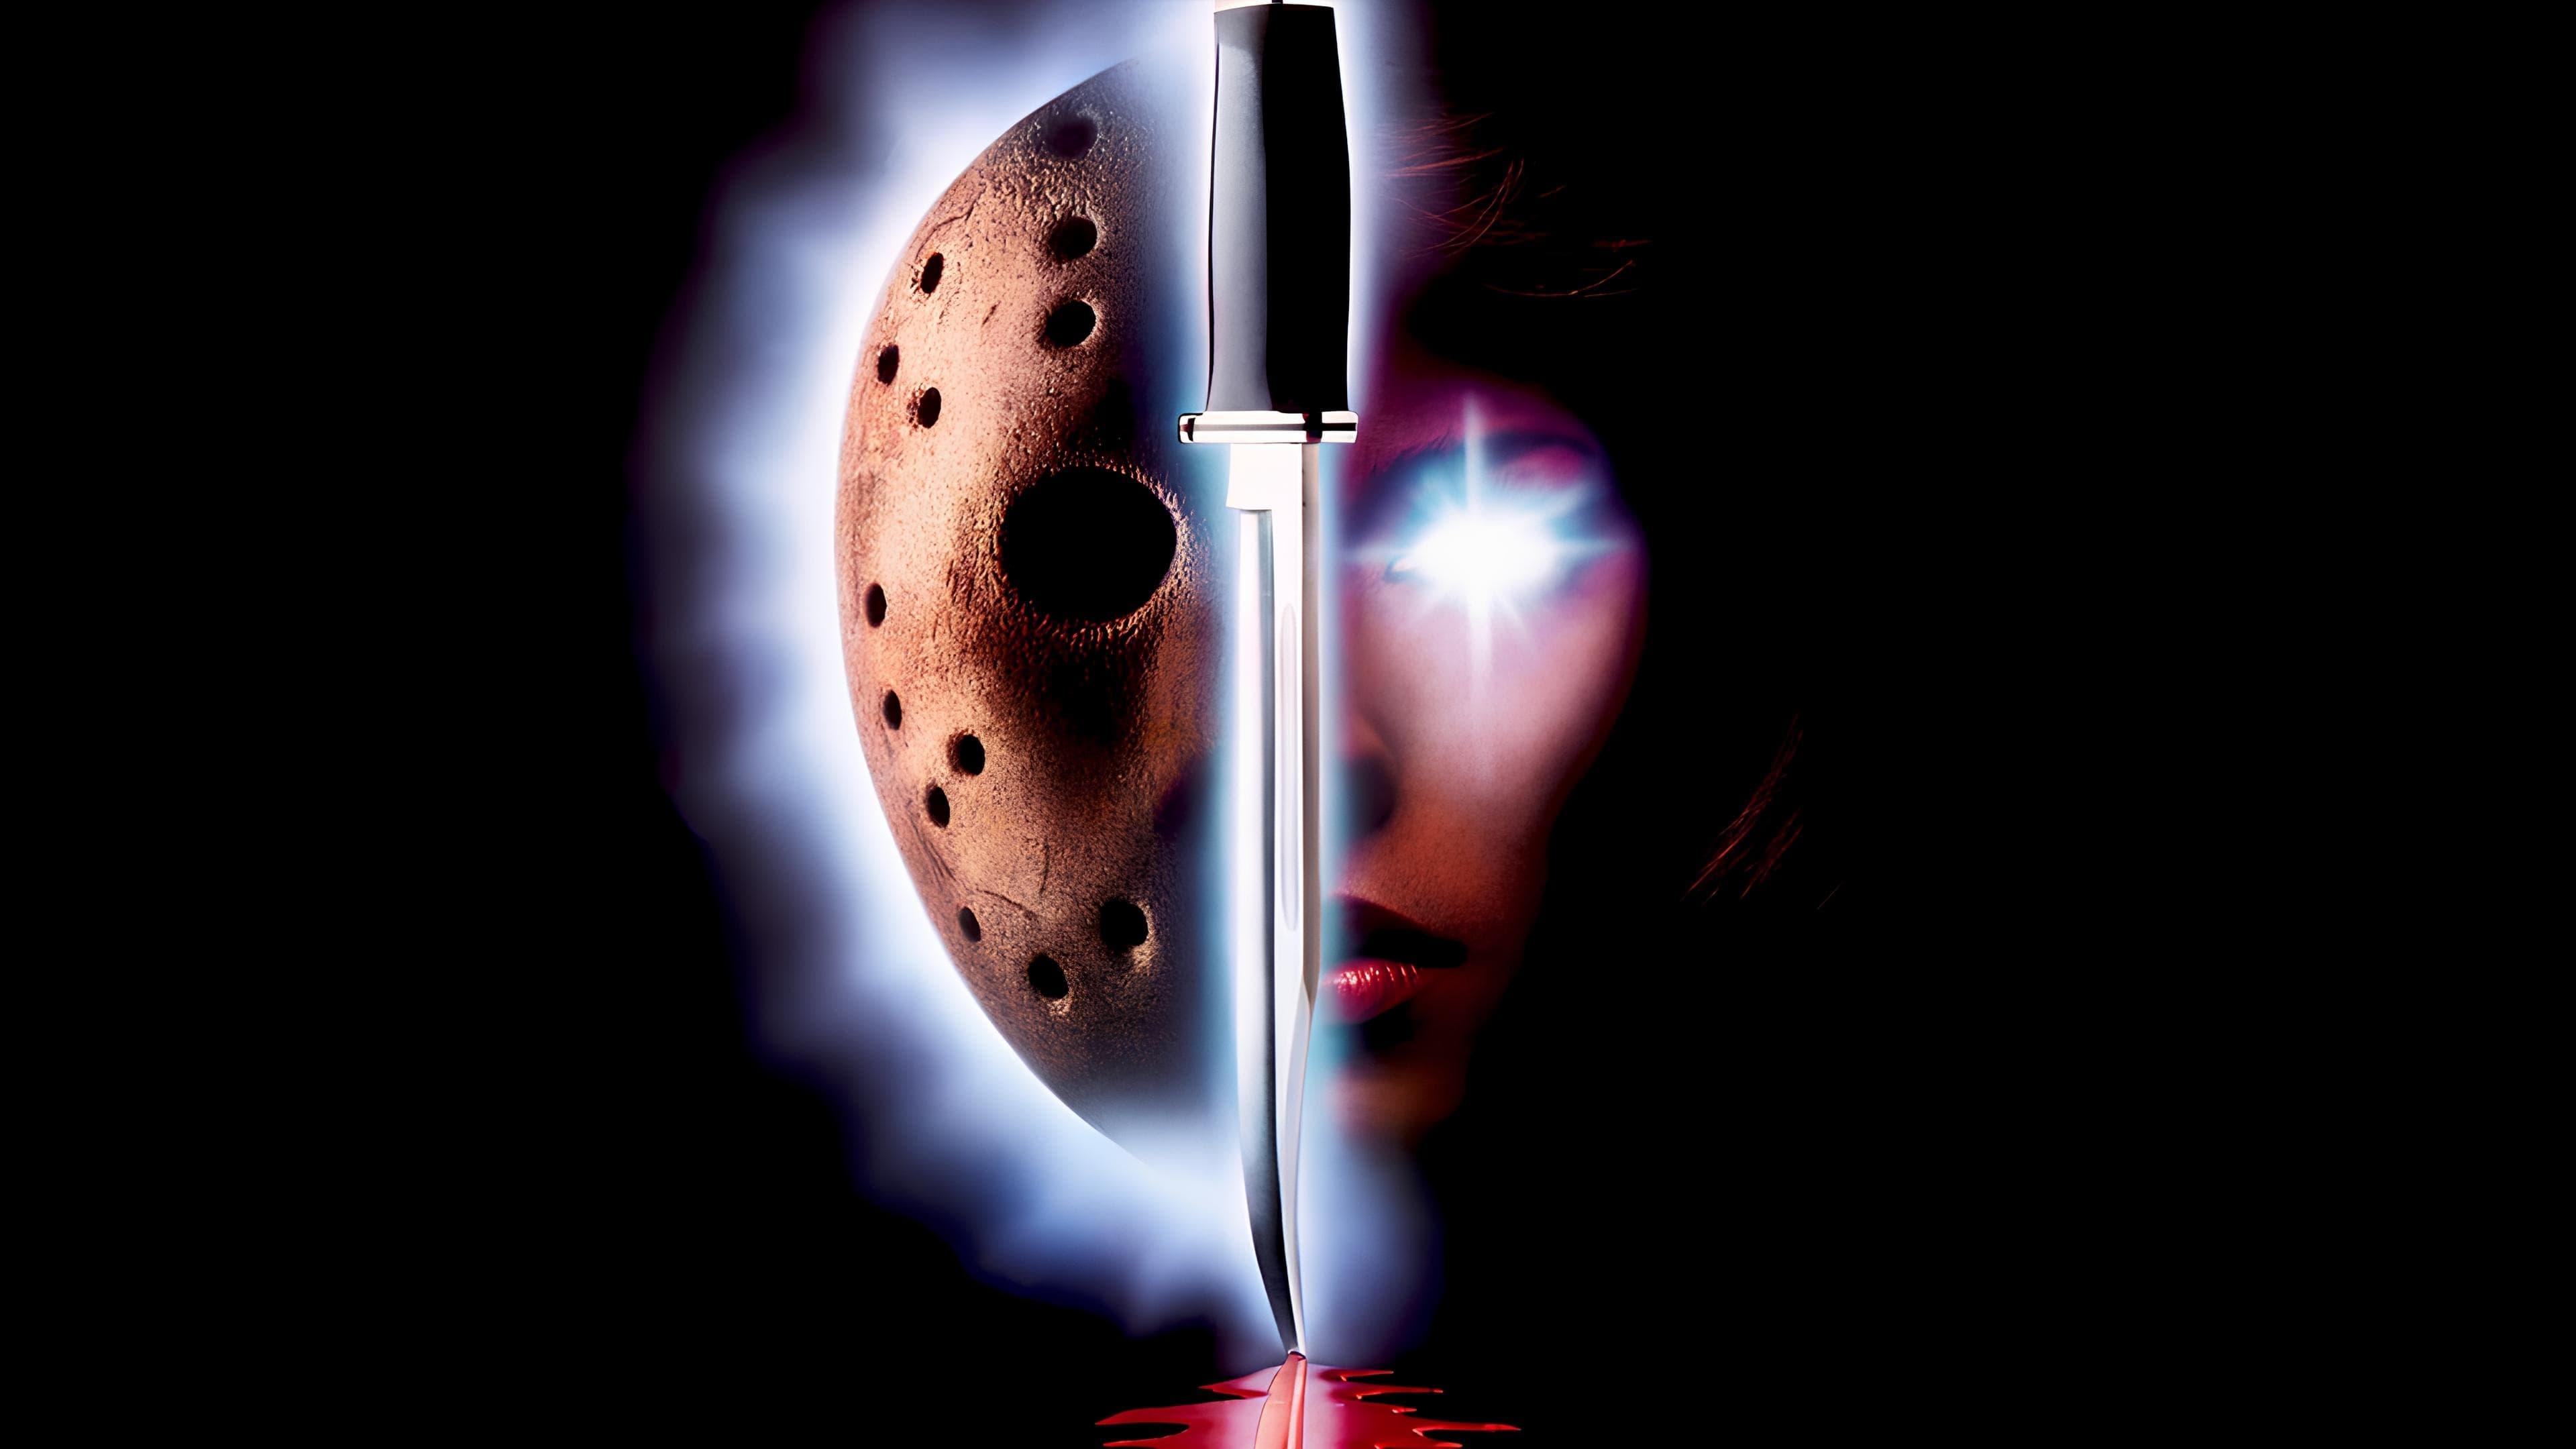 Friday the 13th Part VII: The New Blood backdrop